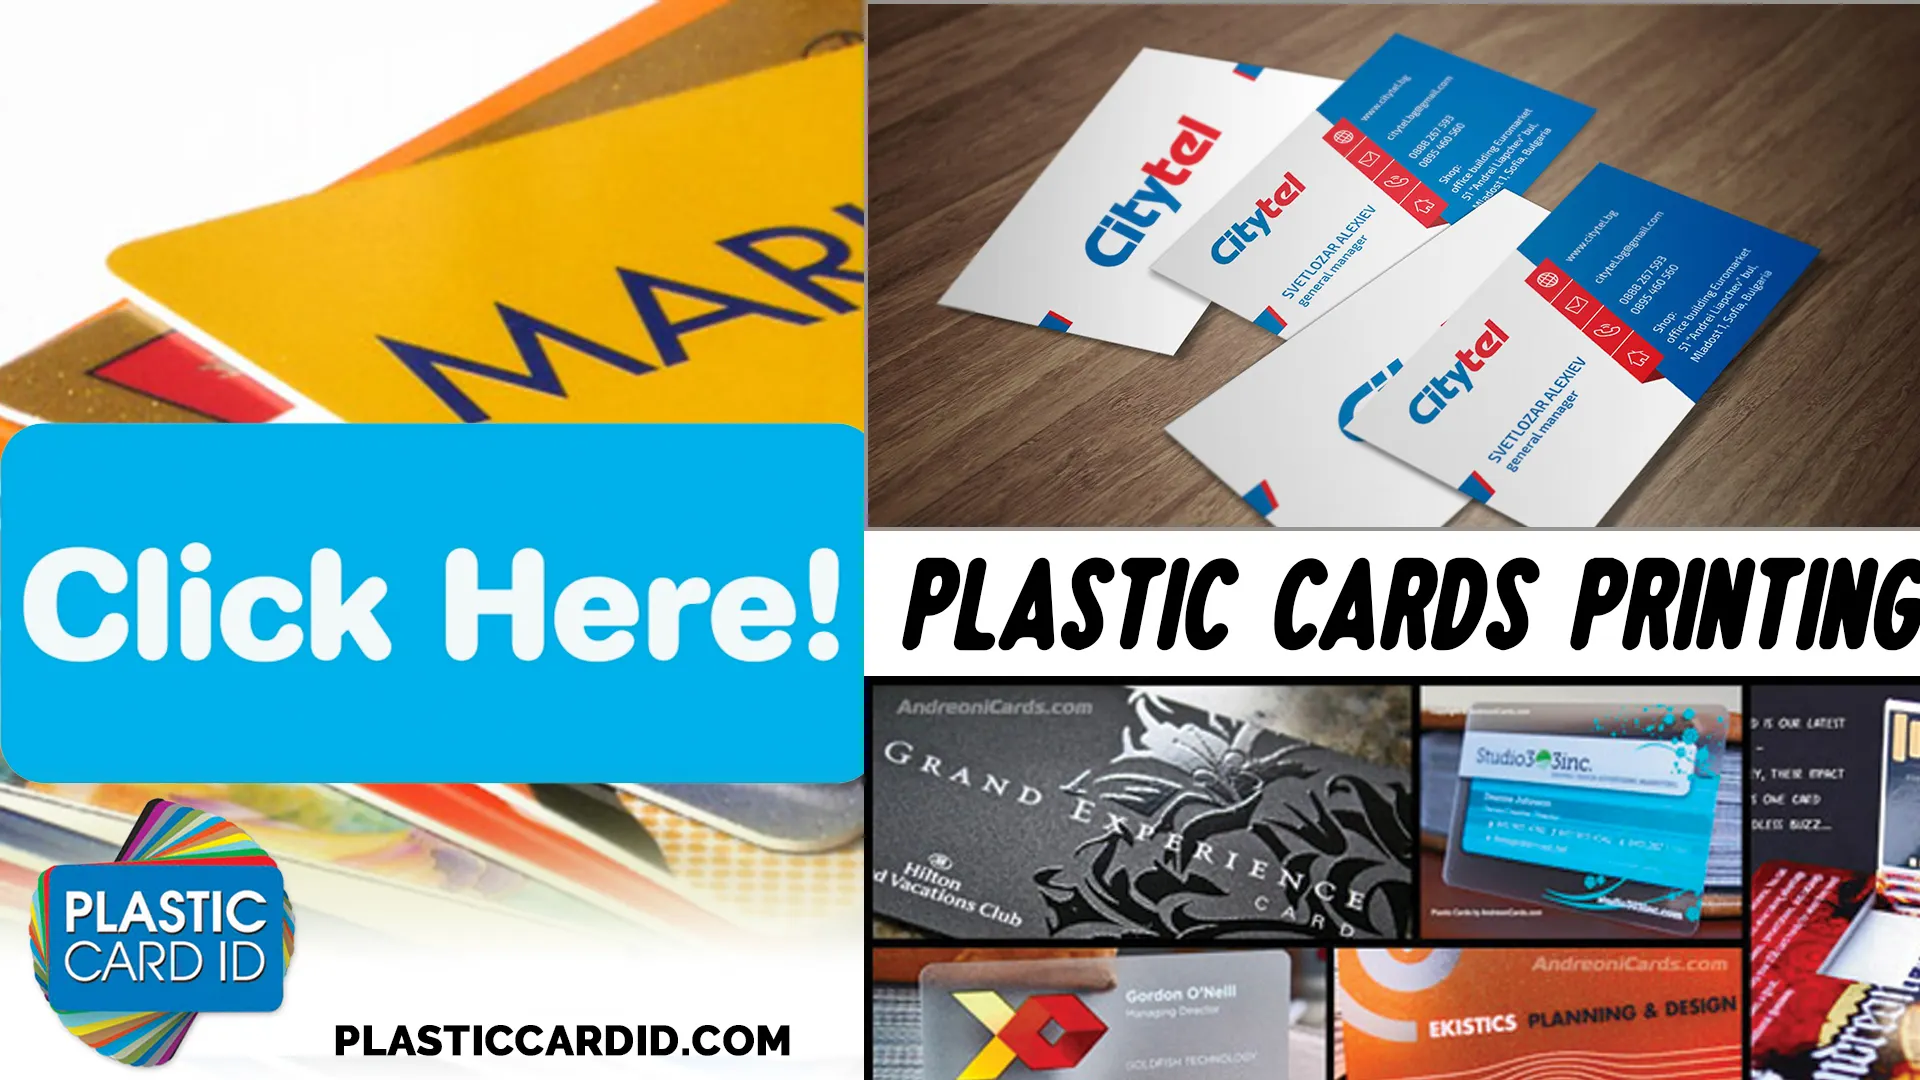 Eco-Conscious Choices in Plastic Card-Use